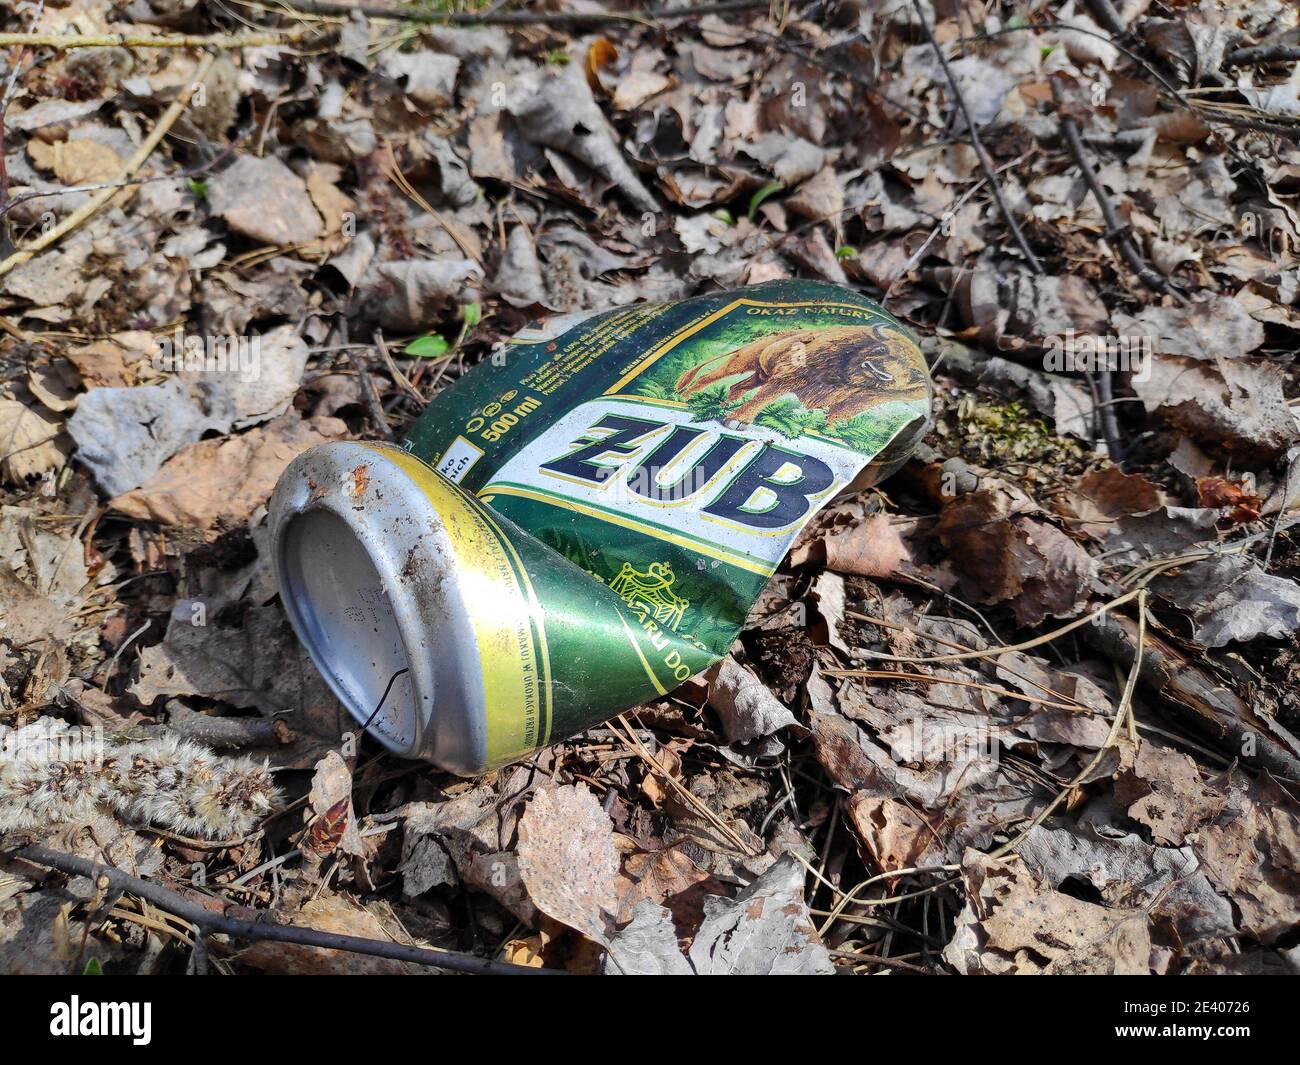 KATOWICE, POLAND - APRIL 4, 2020: Harnas beer metal can dumped illegally in a forest near Katowice, Silesia region, Poland. Stock Photo